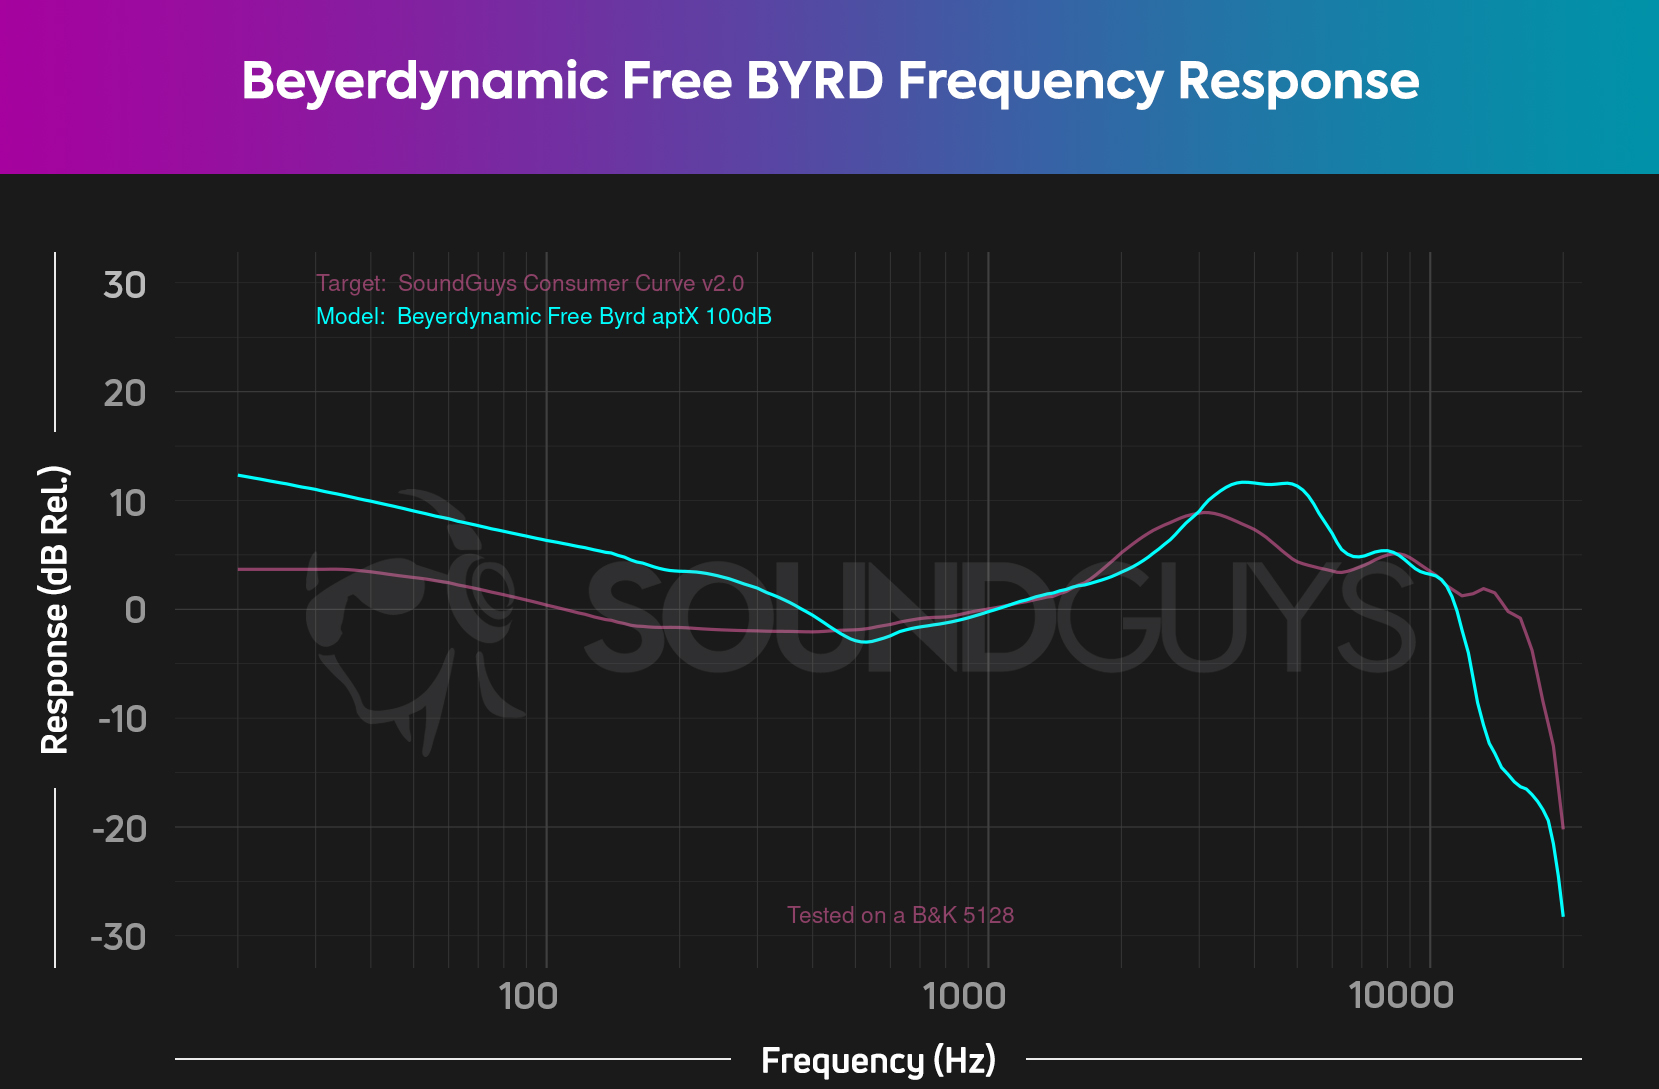 A chart showing the frequency response of the Beyerdynamic Free BYRD 